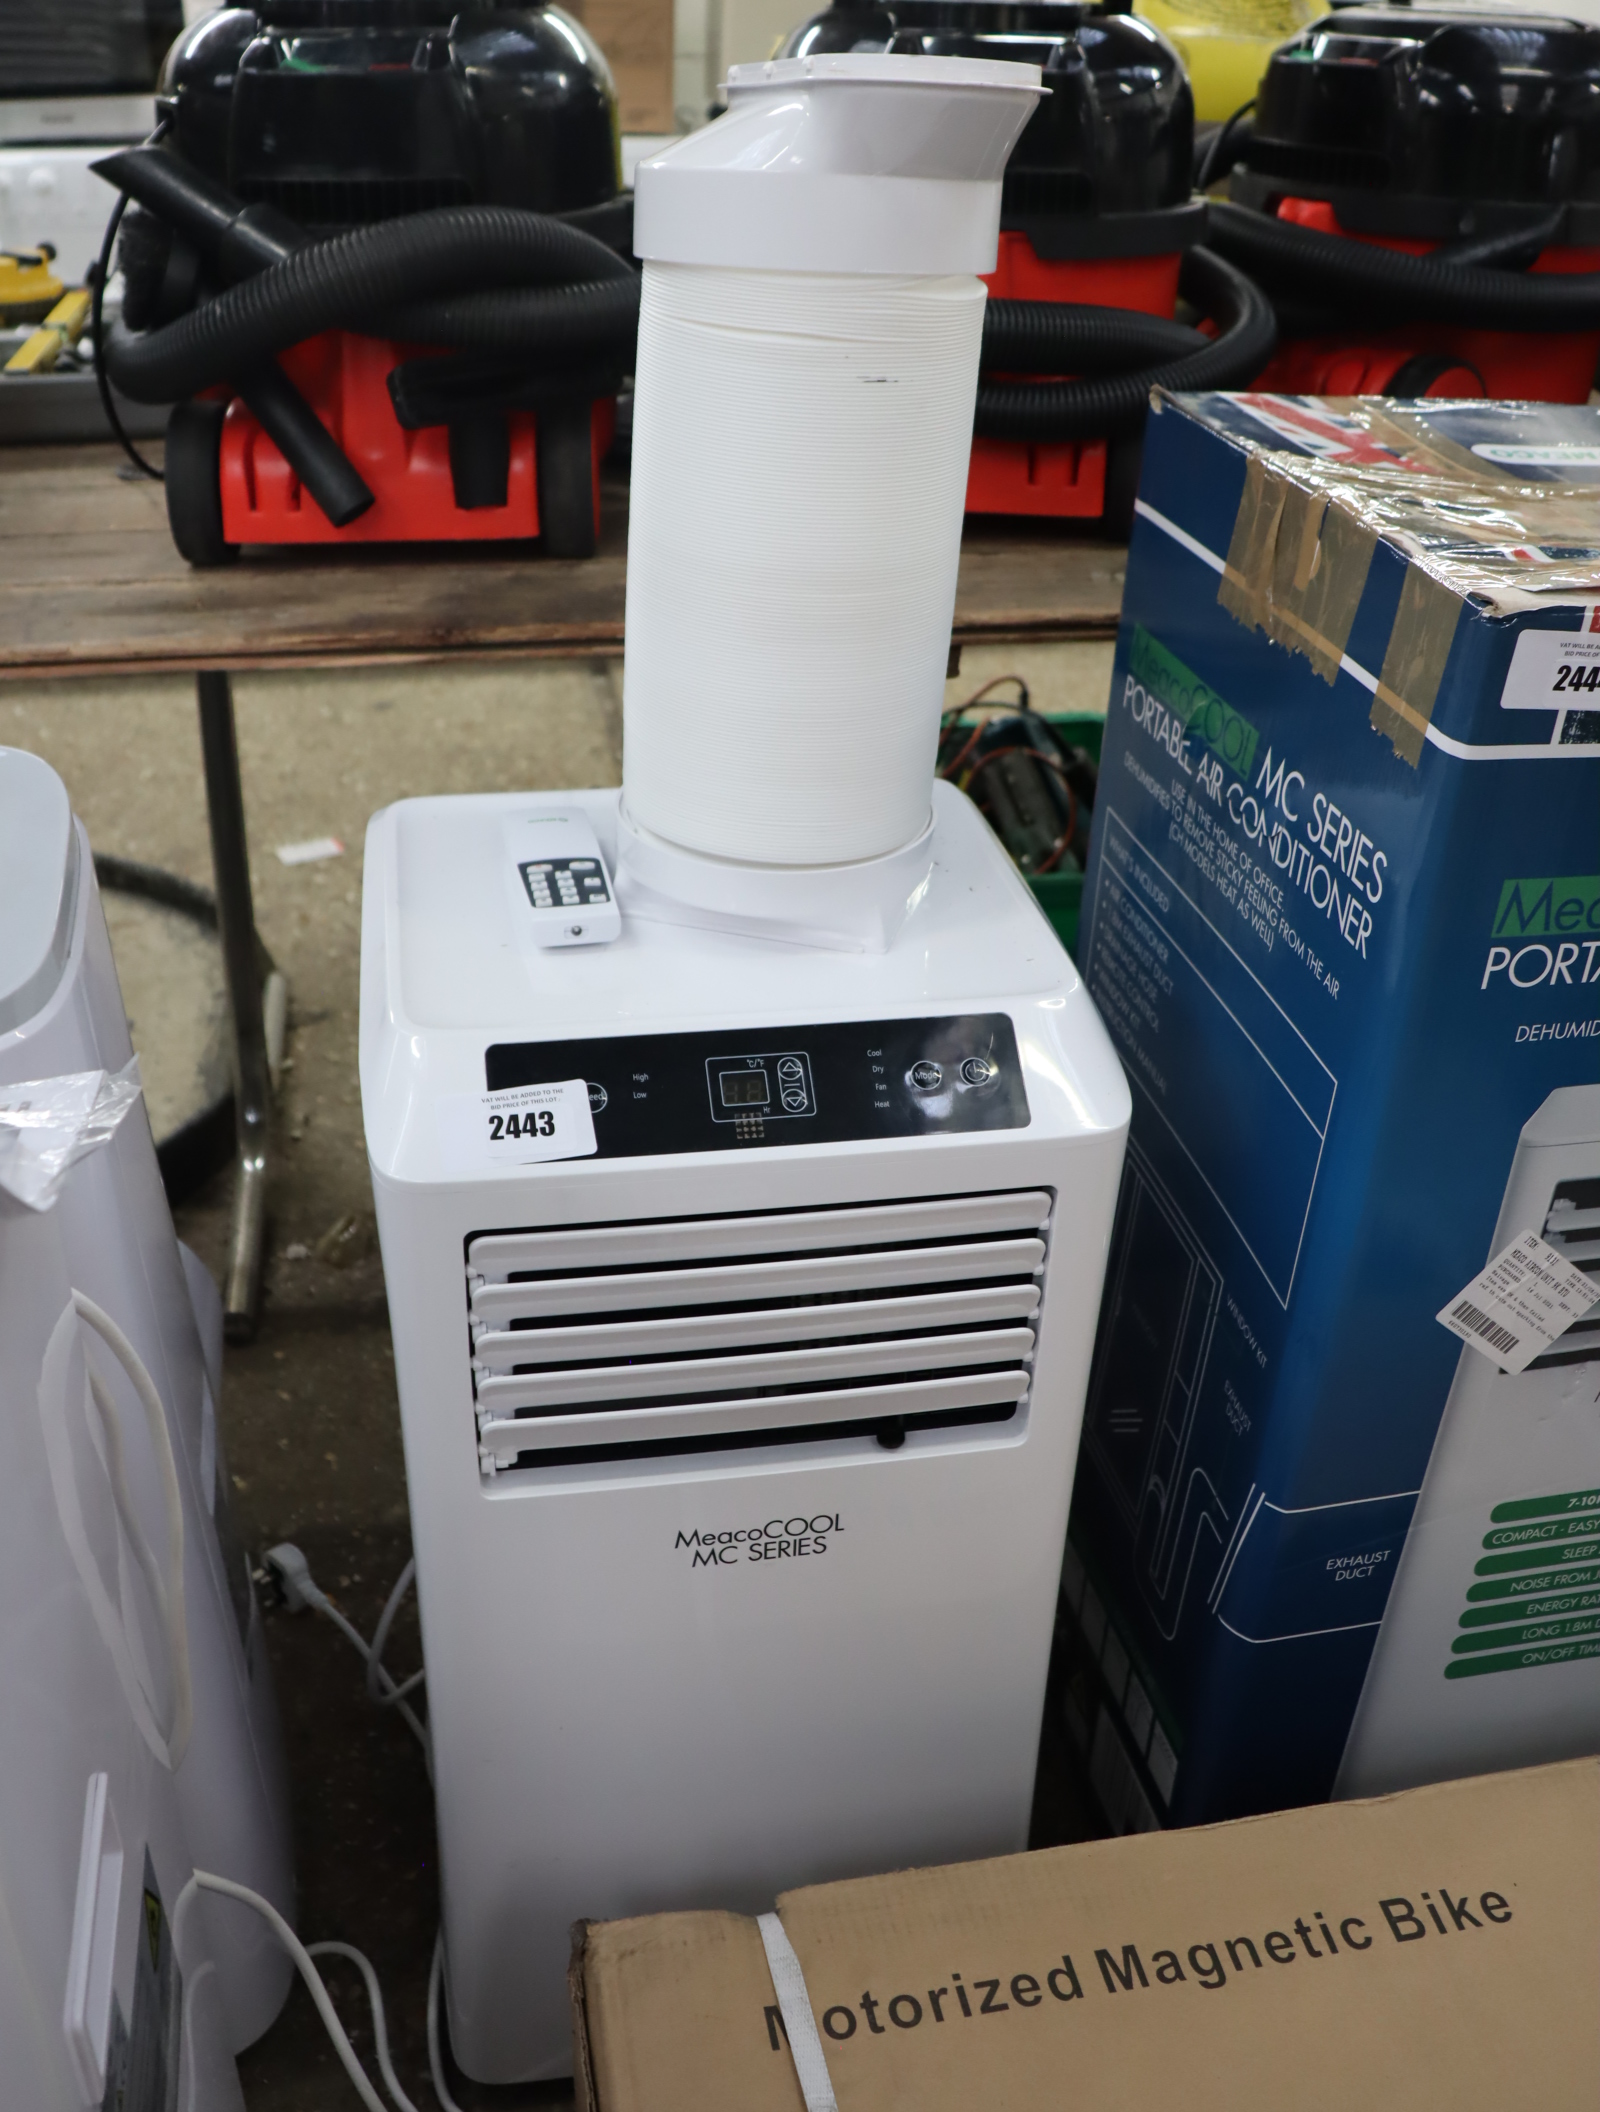 Unboxed Meaco MC Series portable air conditioner